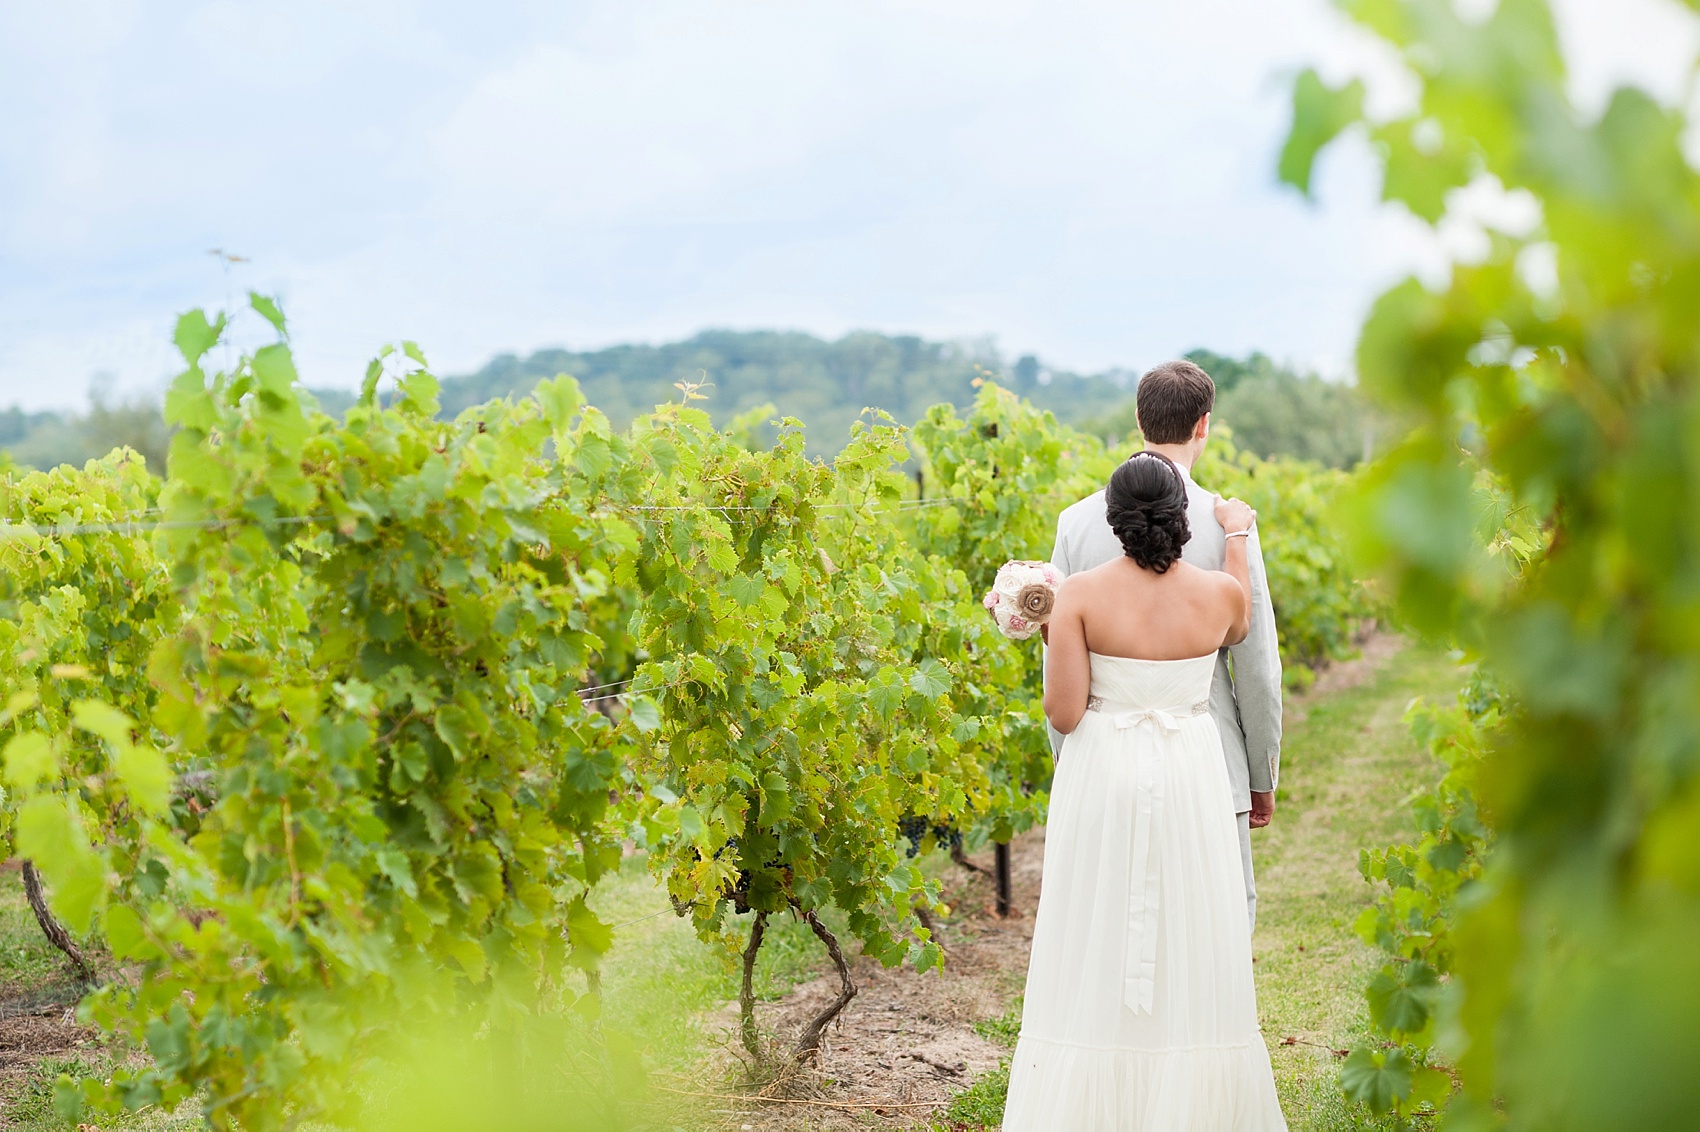 First look photos for a summer vineyard wedding at Hopewell Valley Vineyards. Photos by New Jersey wedding photographer, Mikkel Paige Photography.